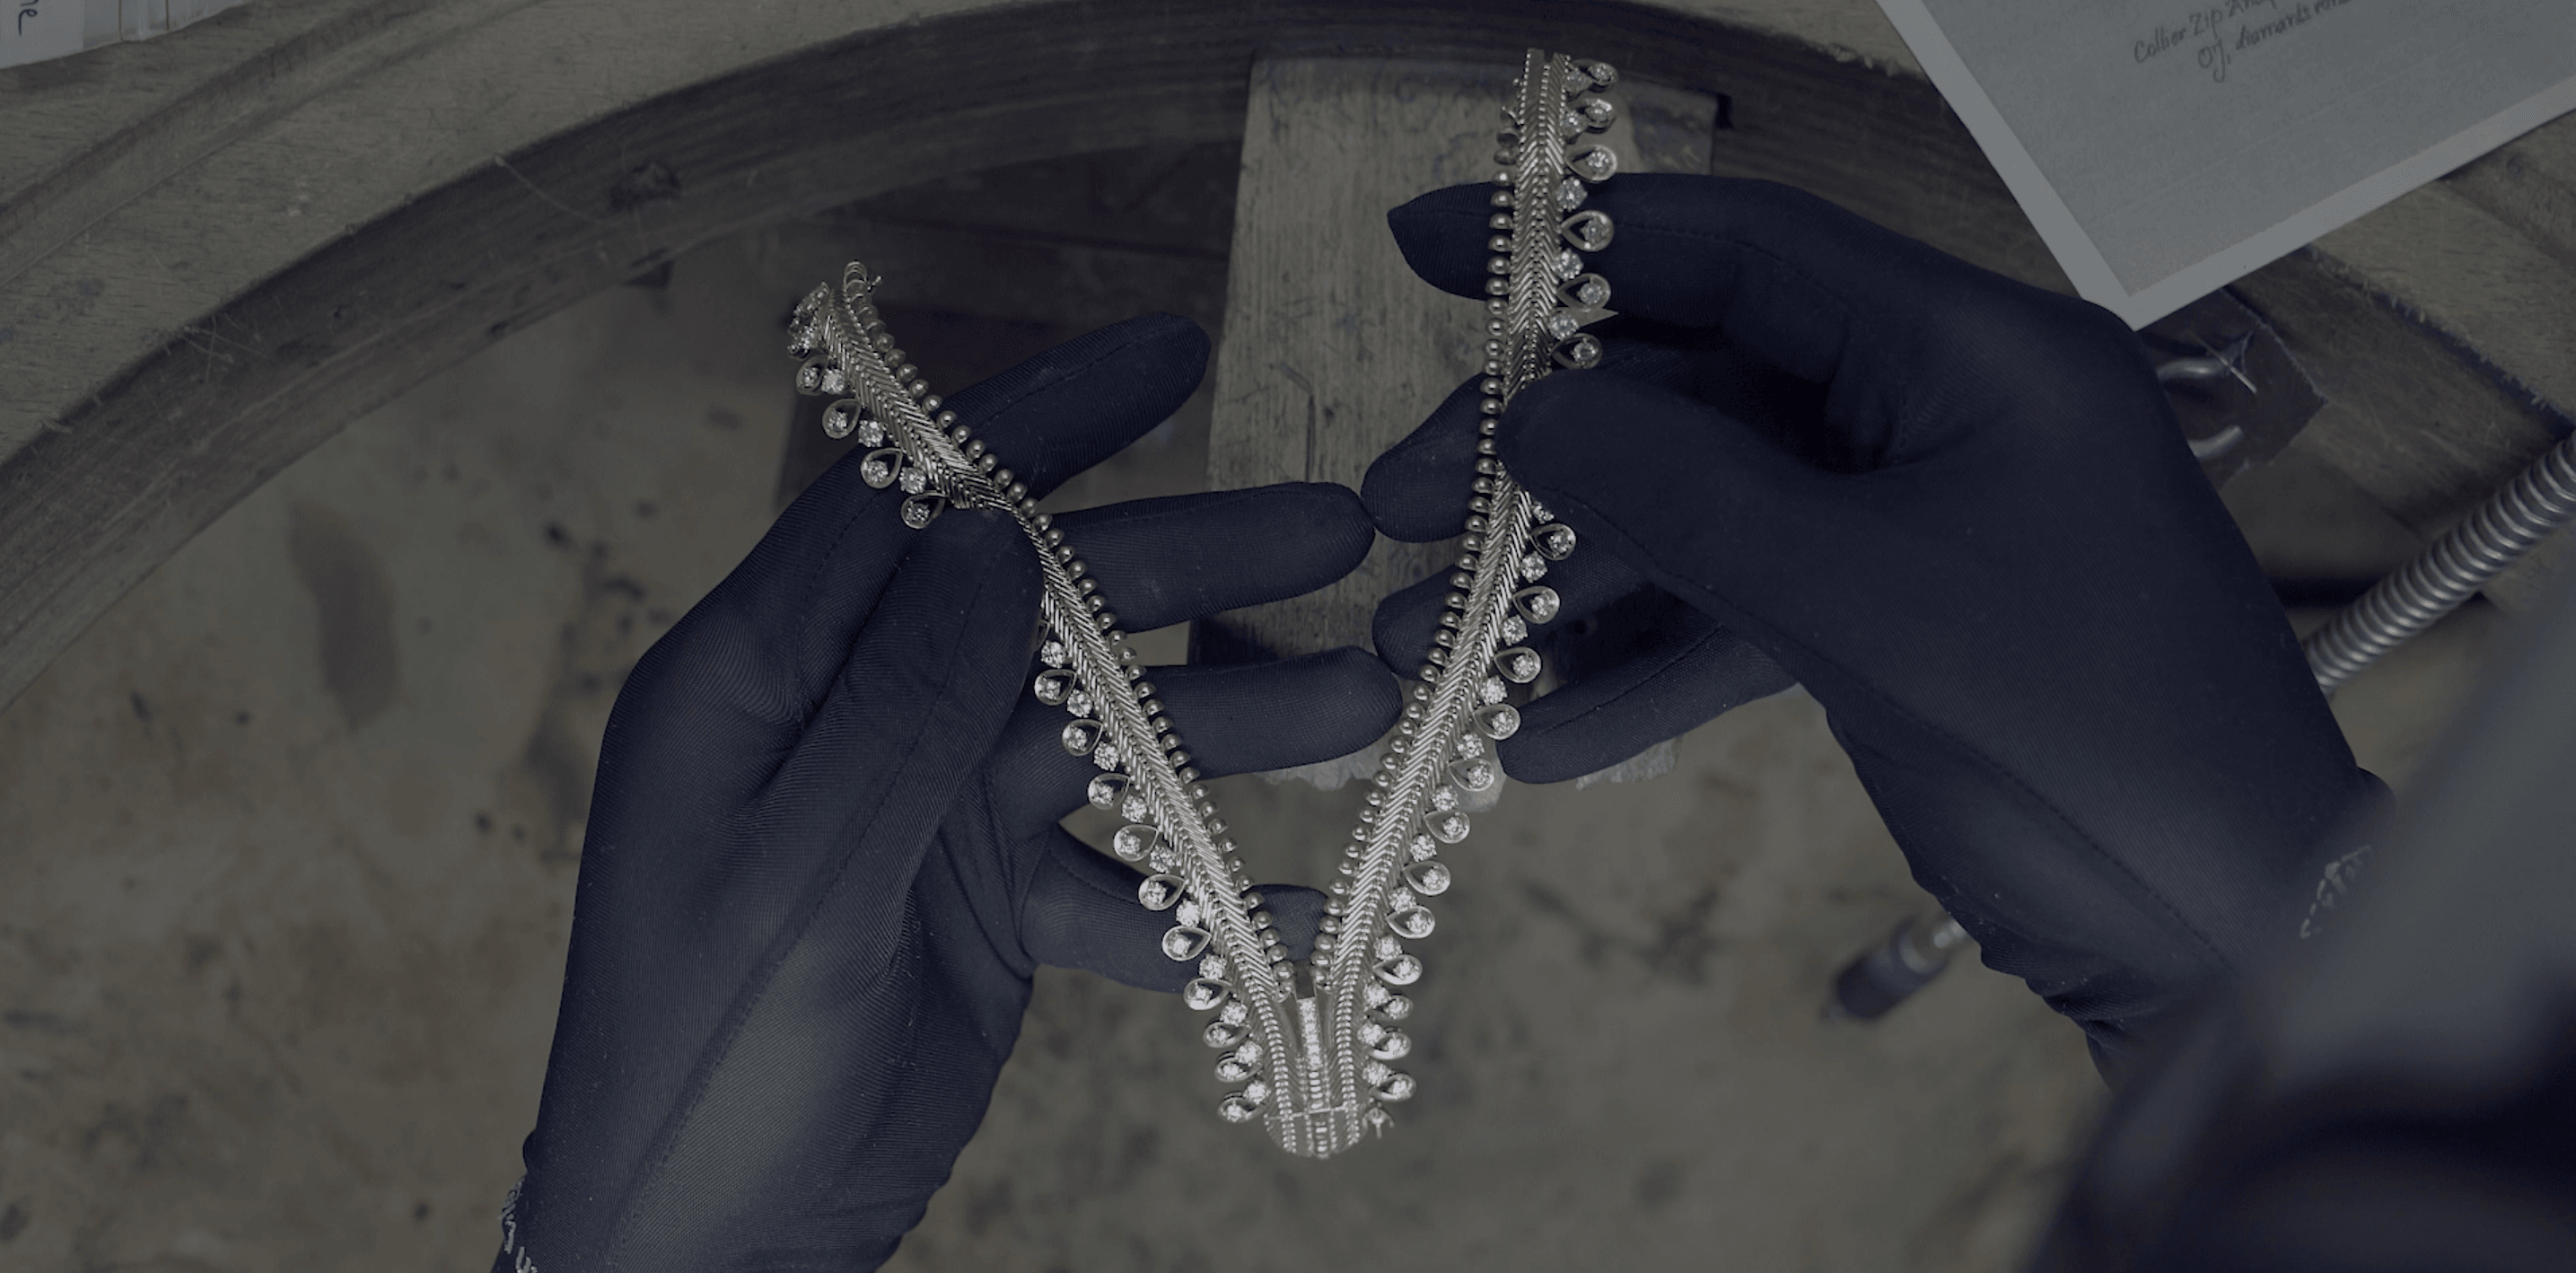 Discover why Place Vendome in Paris is the home of high jewellery